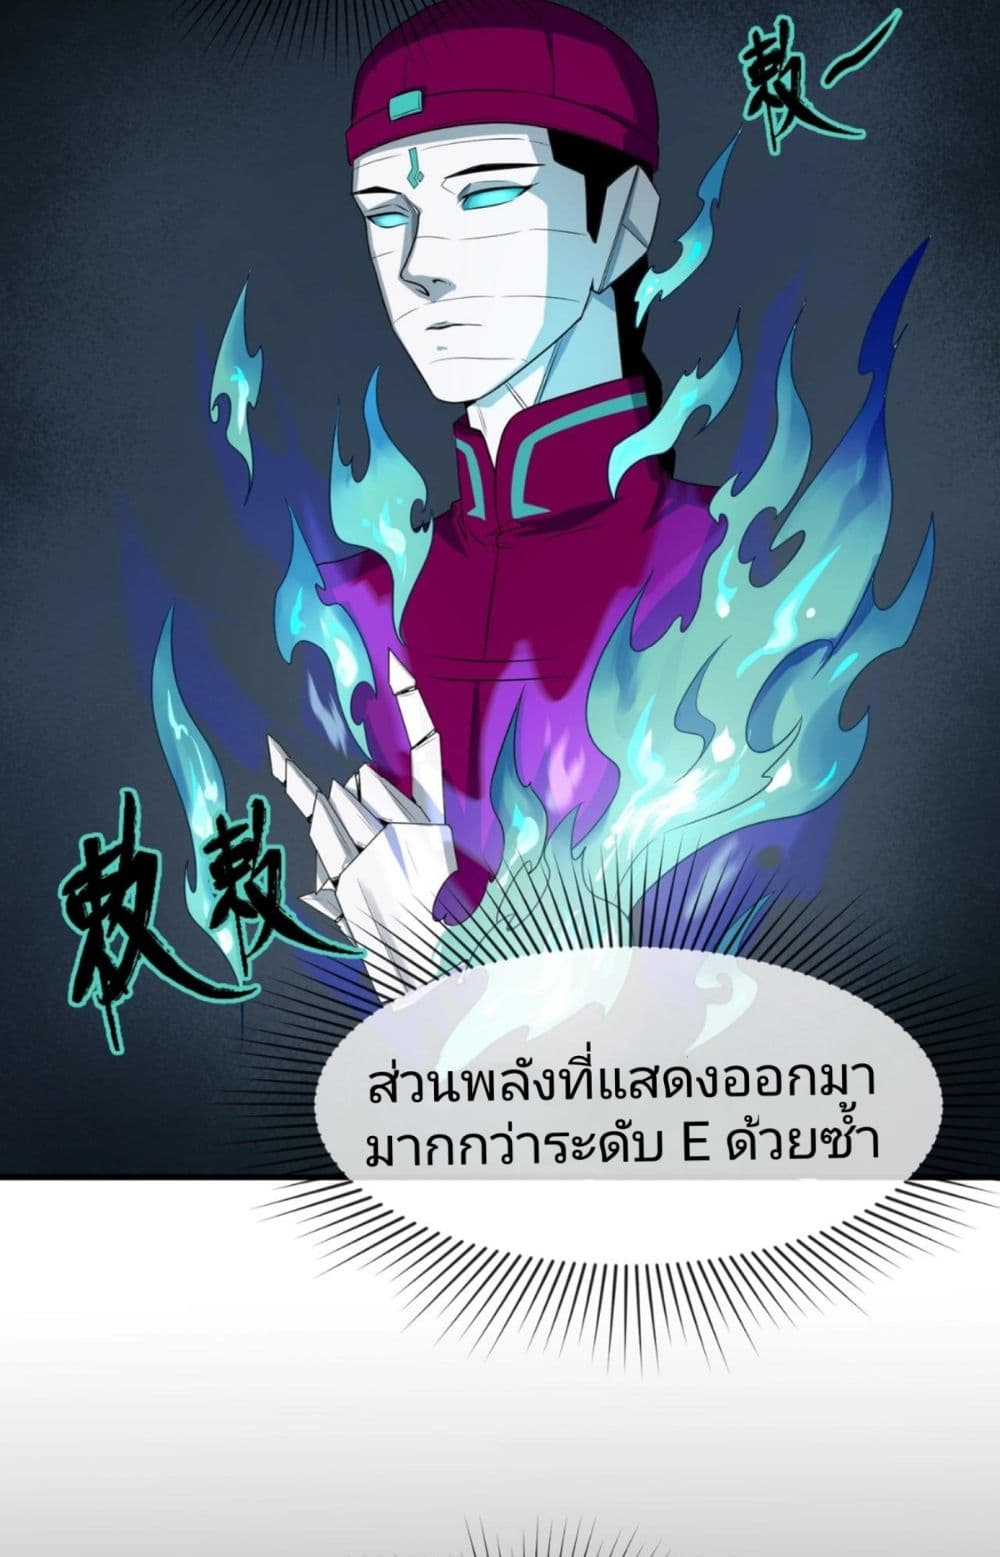 The Age of Ghost Spirits à¸à¸­à¸à¸à¸µà¹ 2 (37)